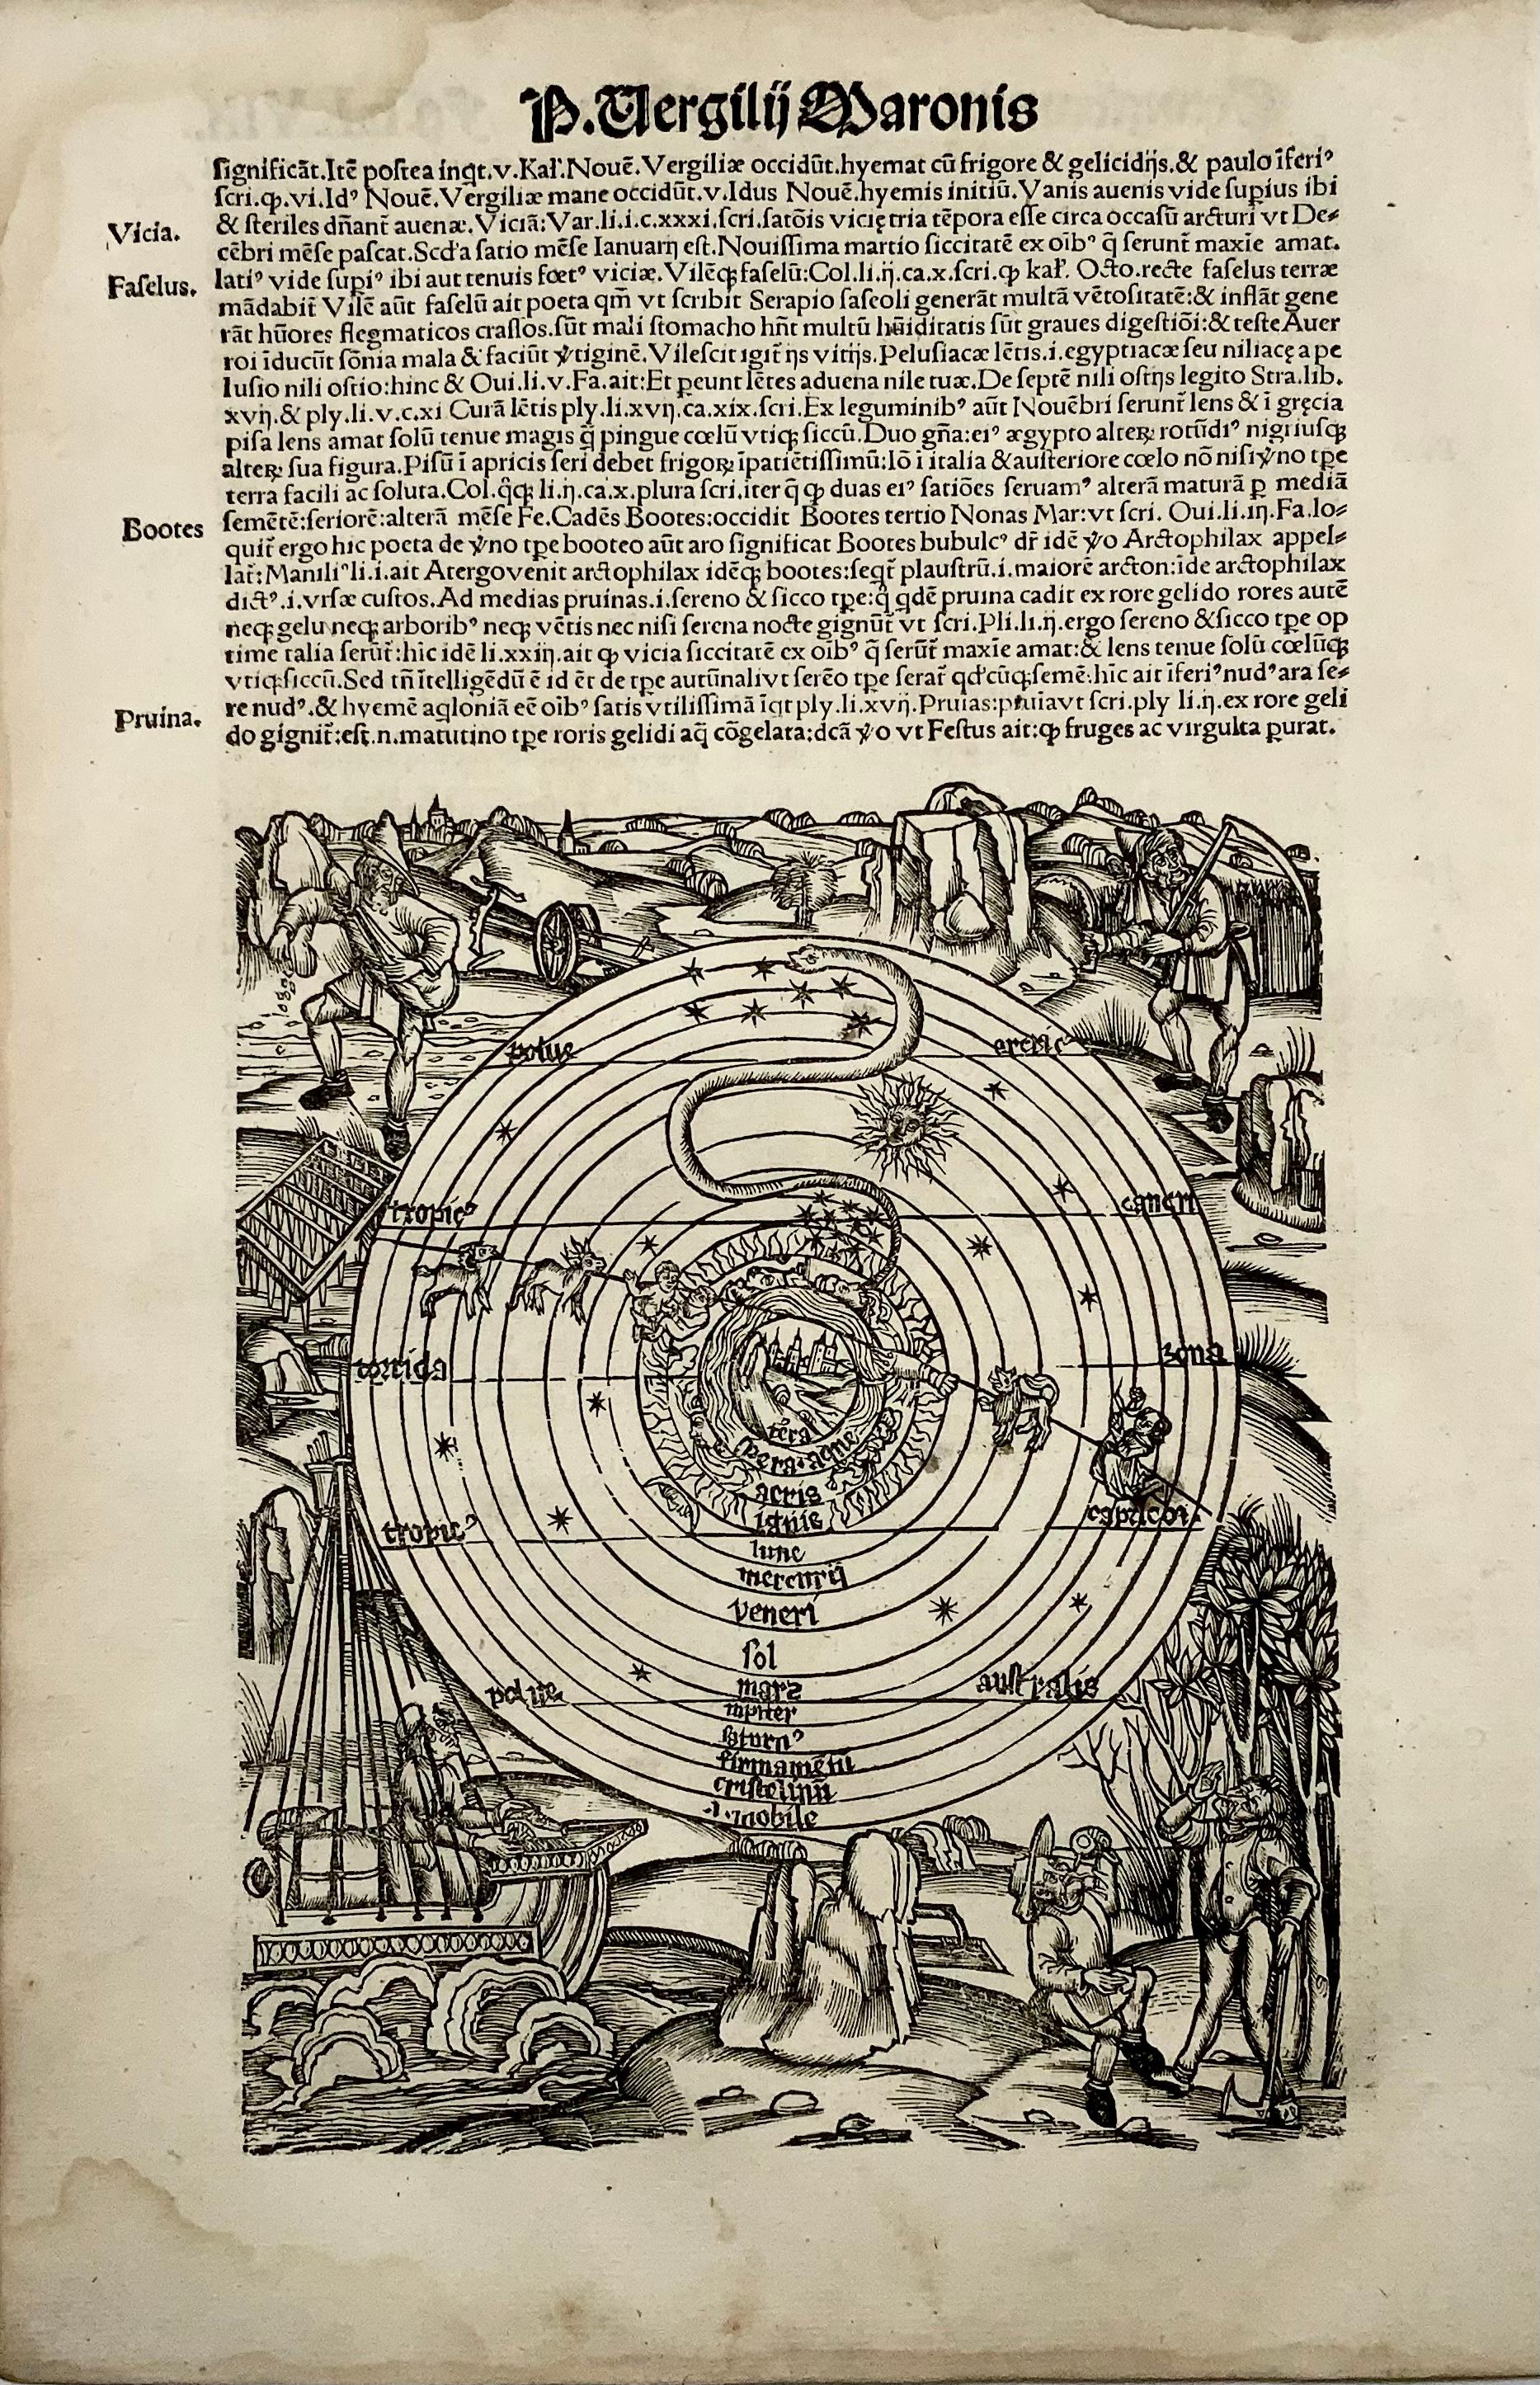 Original from 1515

A pivotal and iconic calendar woodcut from 1517 and first used in the 1502 of Sebastian Brandt’s edition of the works of Vergil.

The four books of The Georgics are about the cultivation of land, orchards, animal husbandry